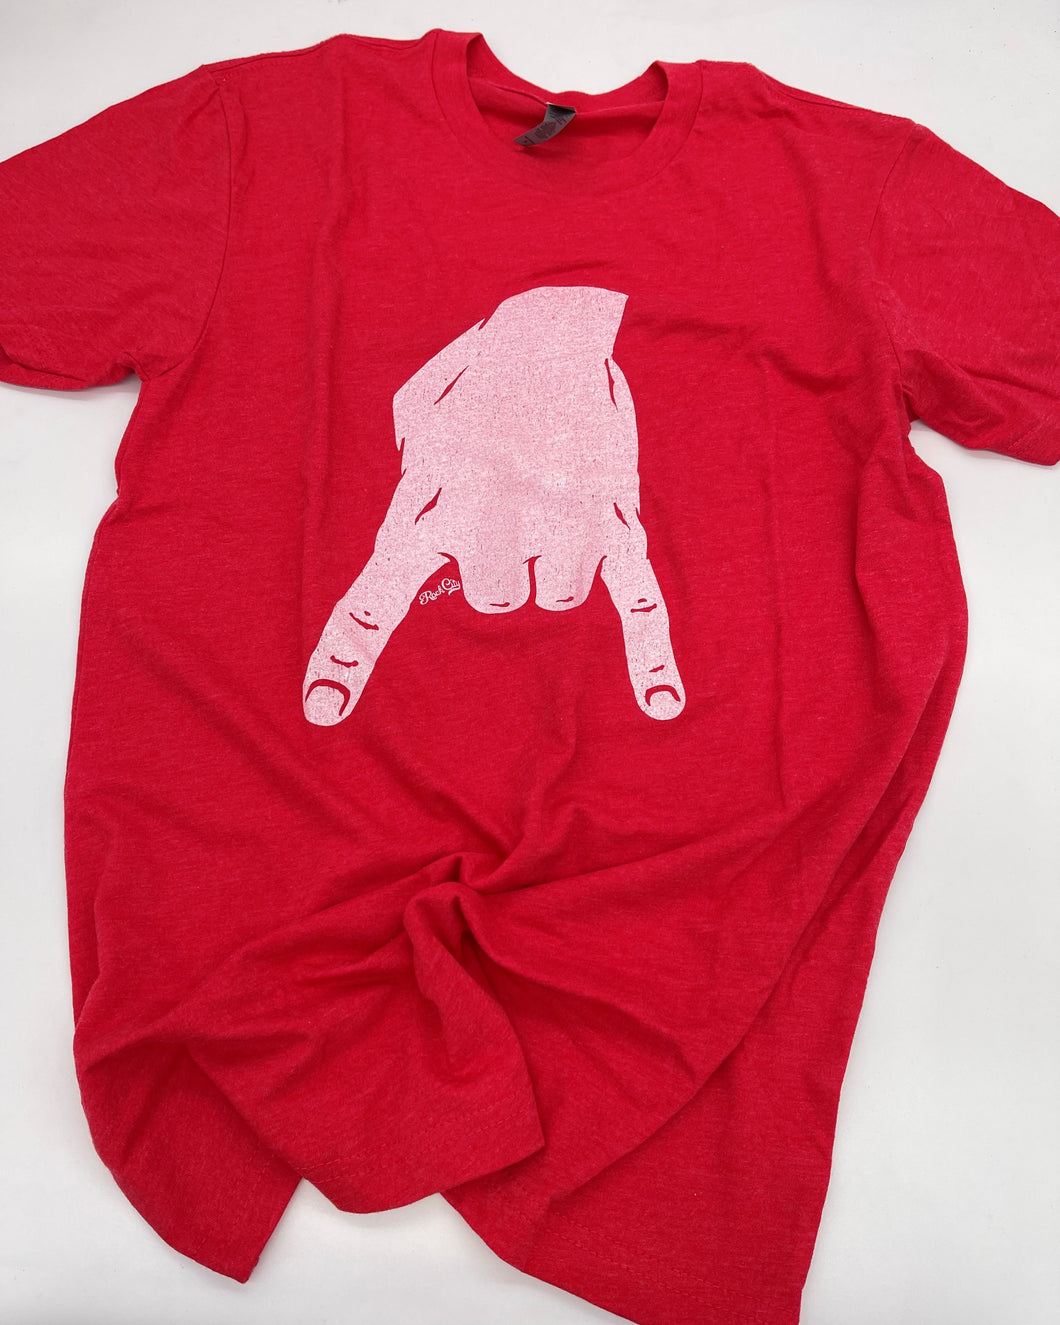 Horns Down Graphic Tee